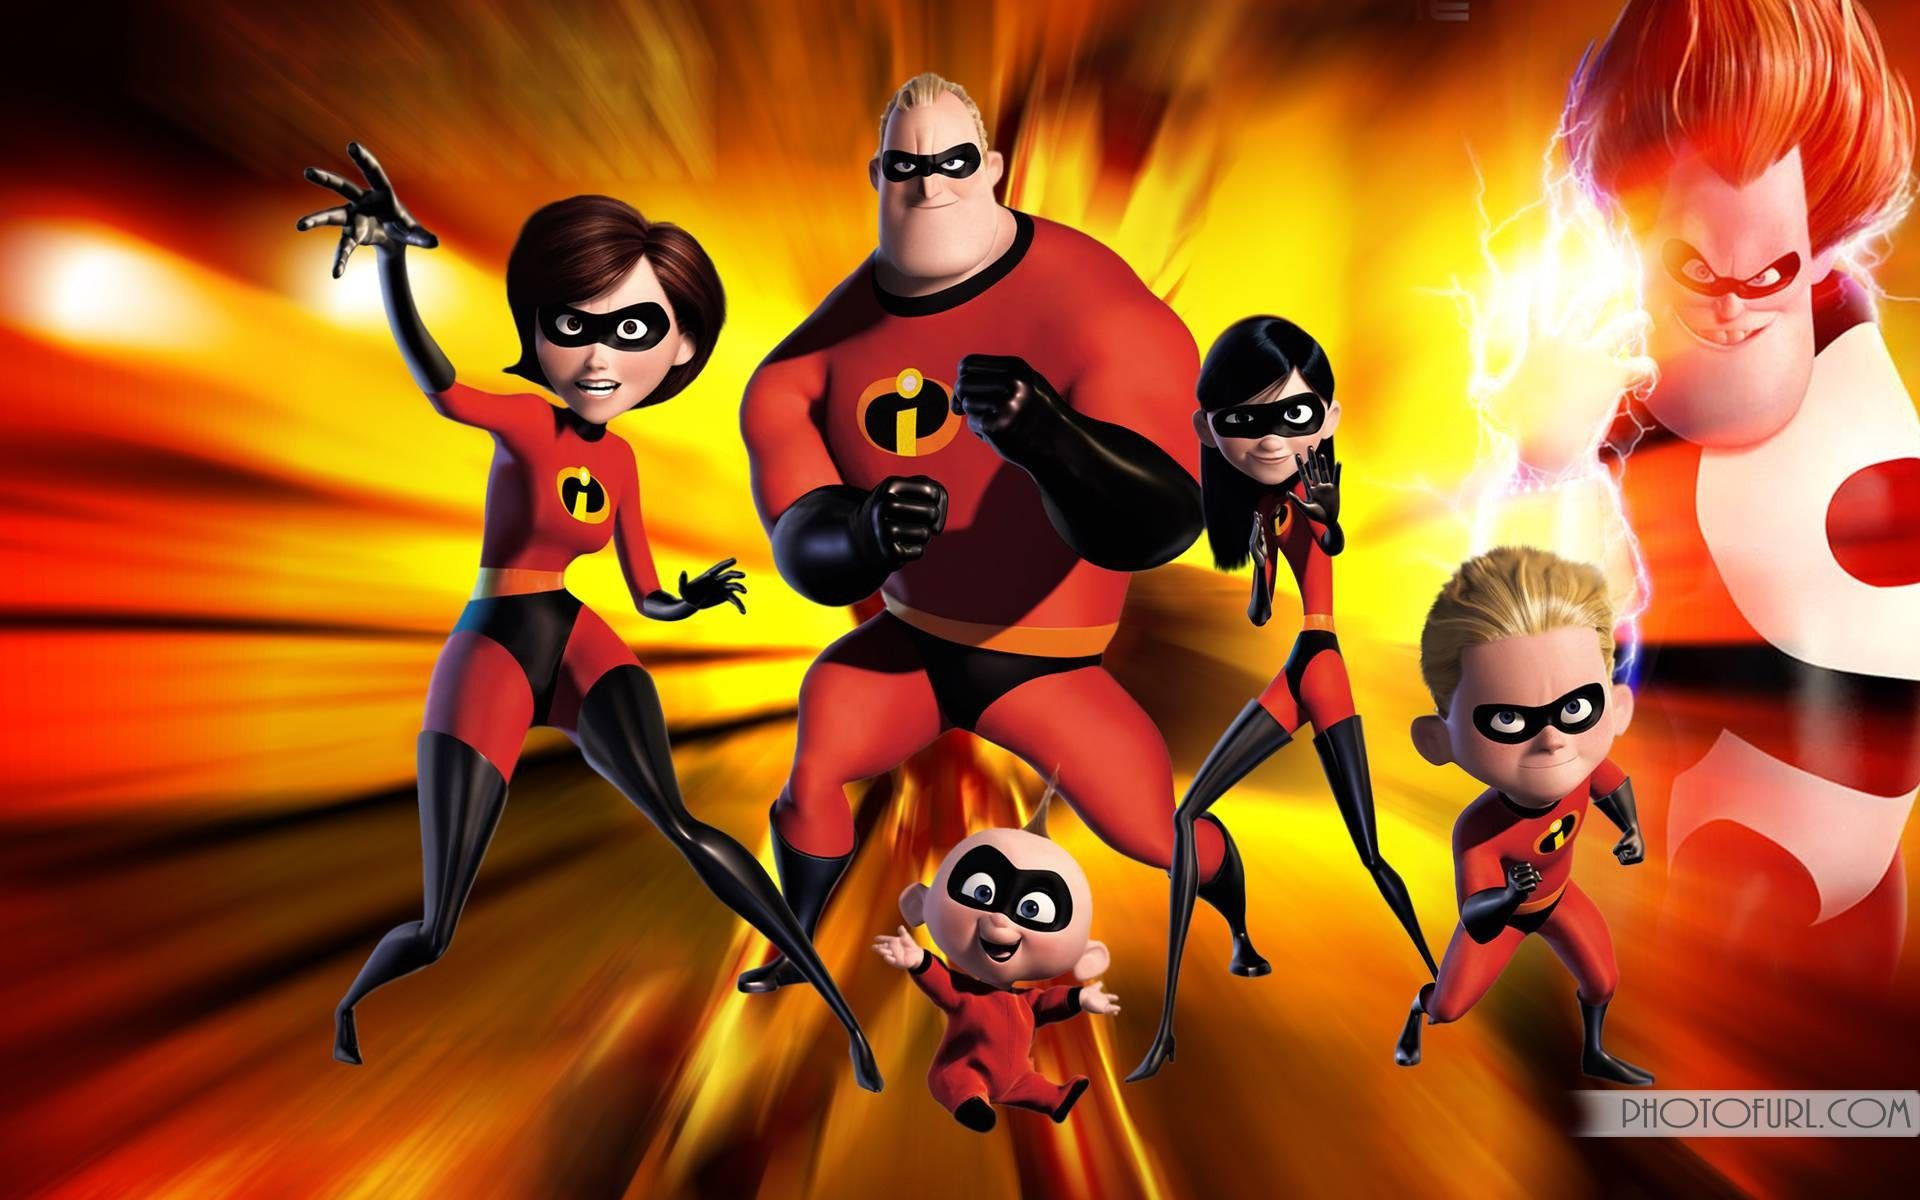 Mr. Incredible takes on Syndrome in “The Incredibles” Wallpaper